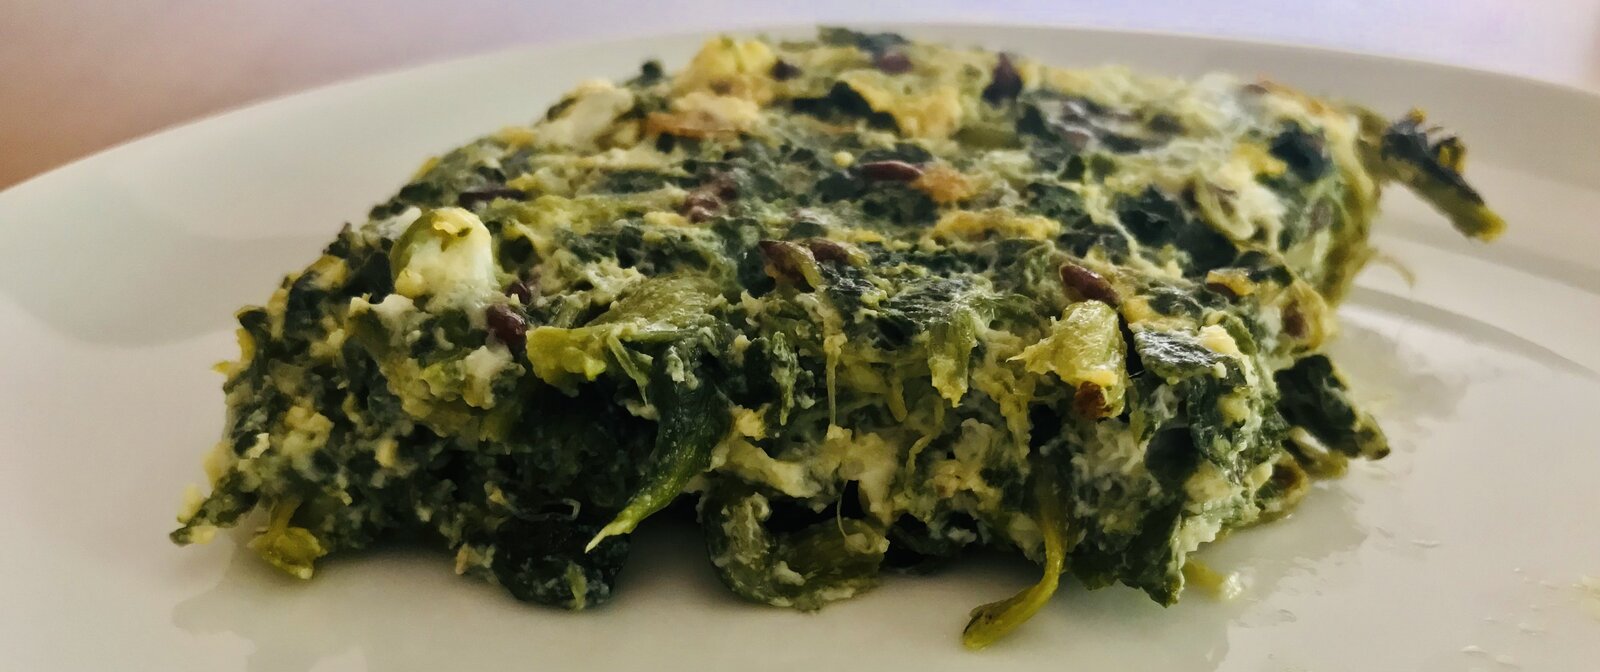 Spinach and Egg Whites Frittata.jpeg